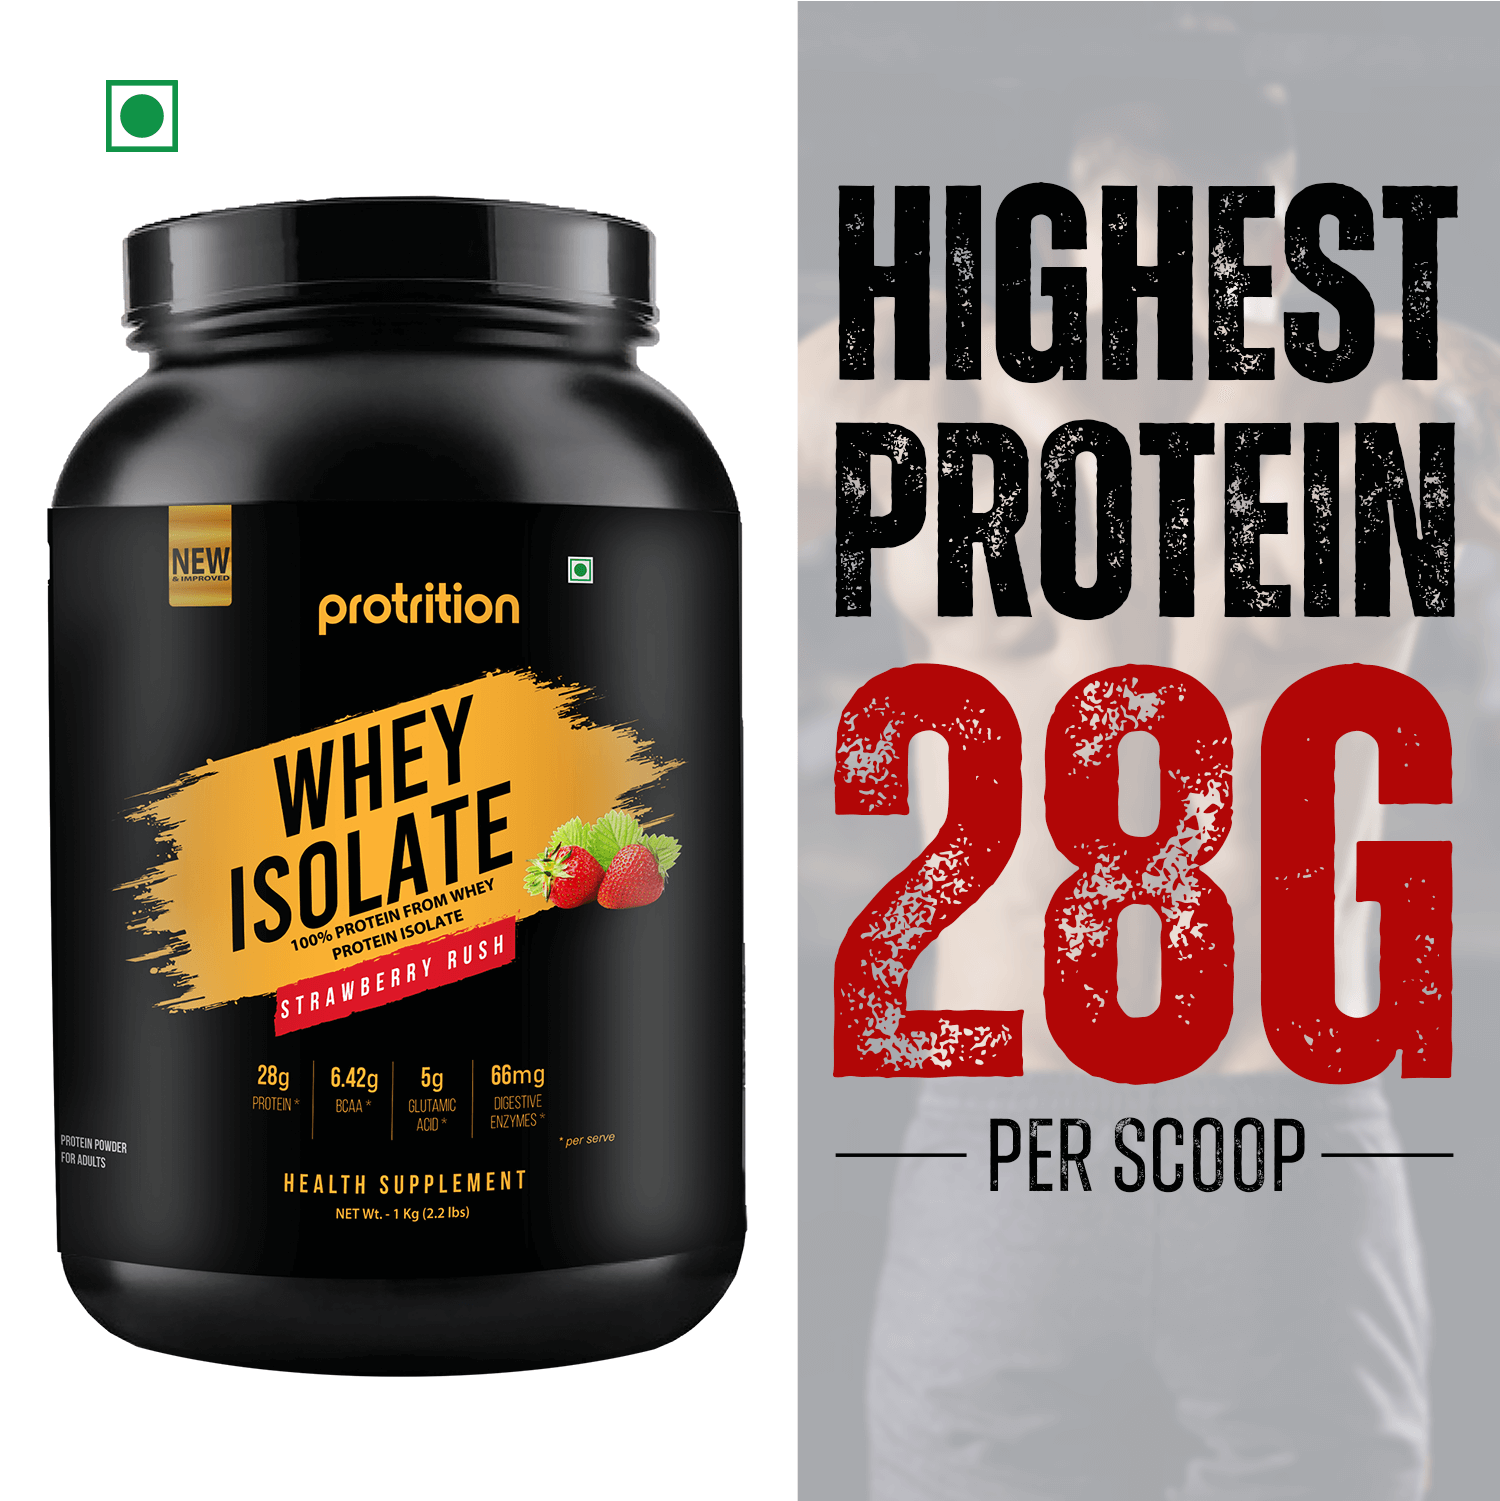 Protrition Whey Isolate, 1Kg, Strawberry Rush